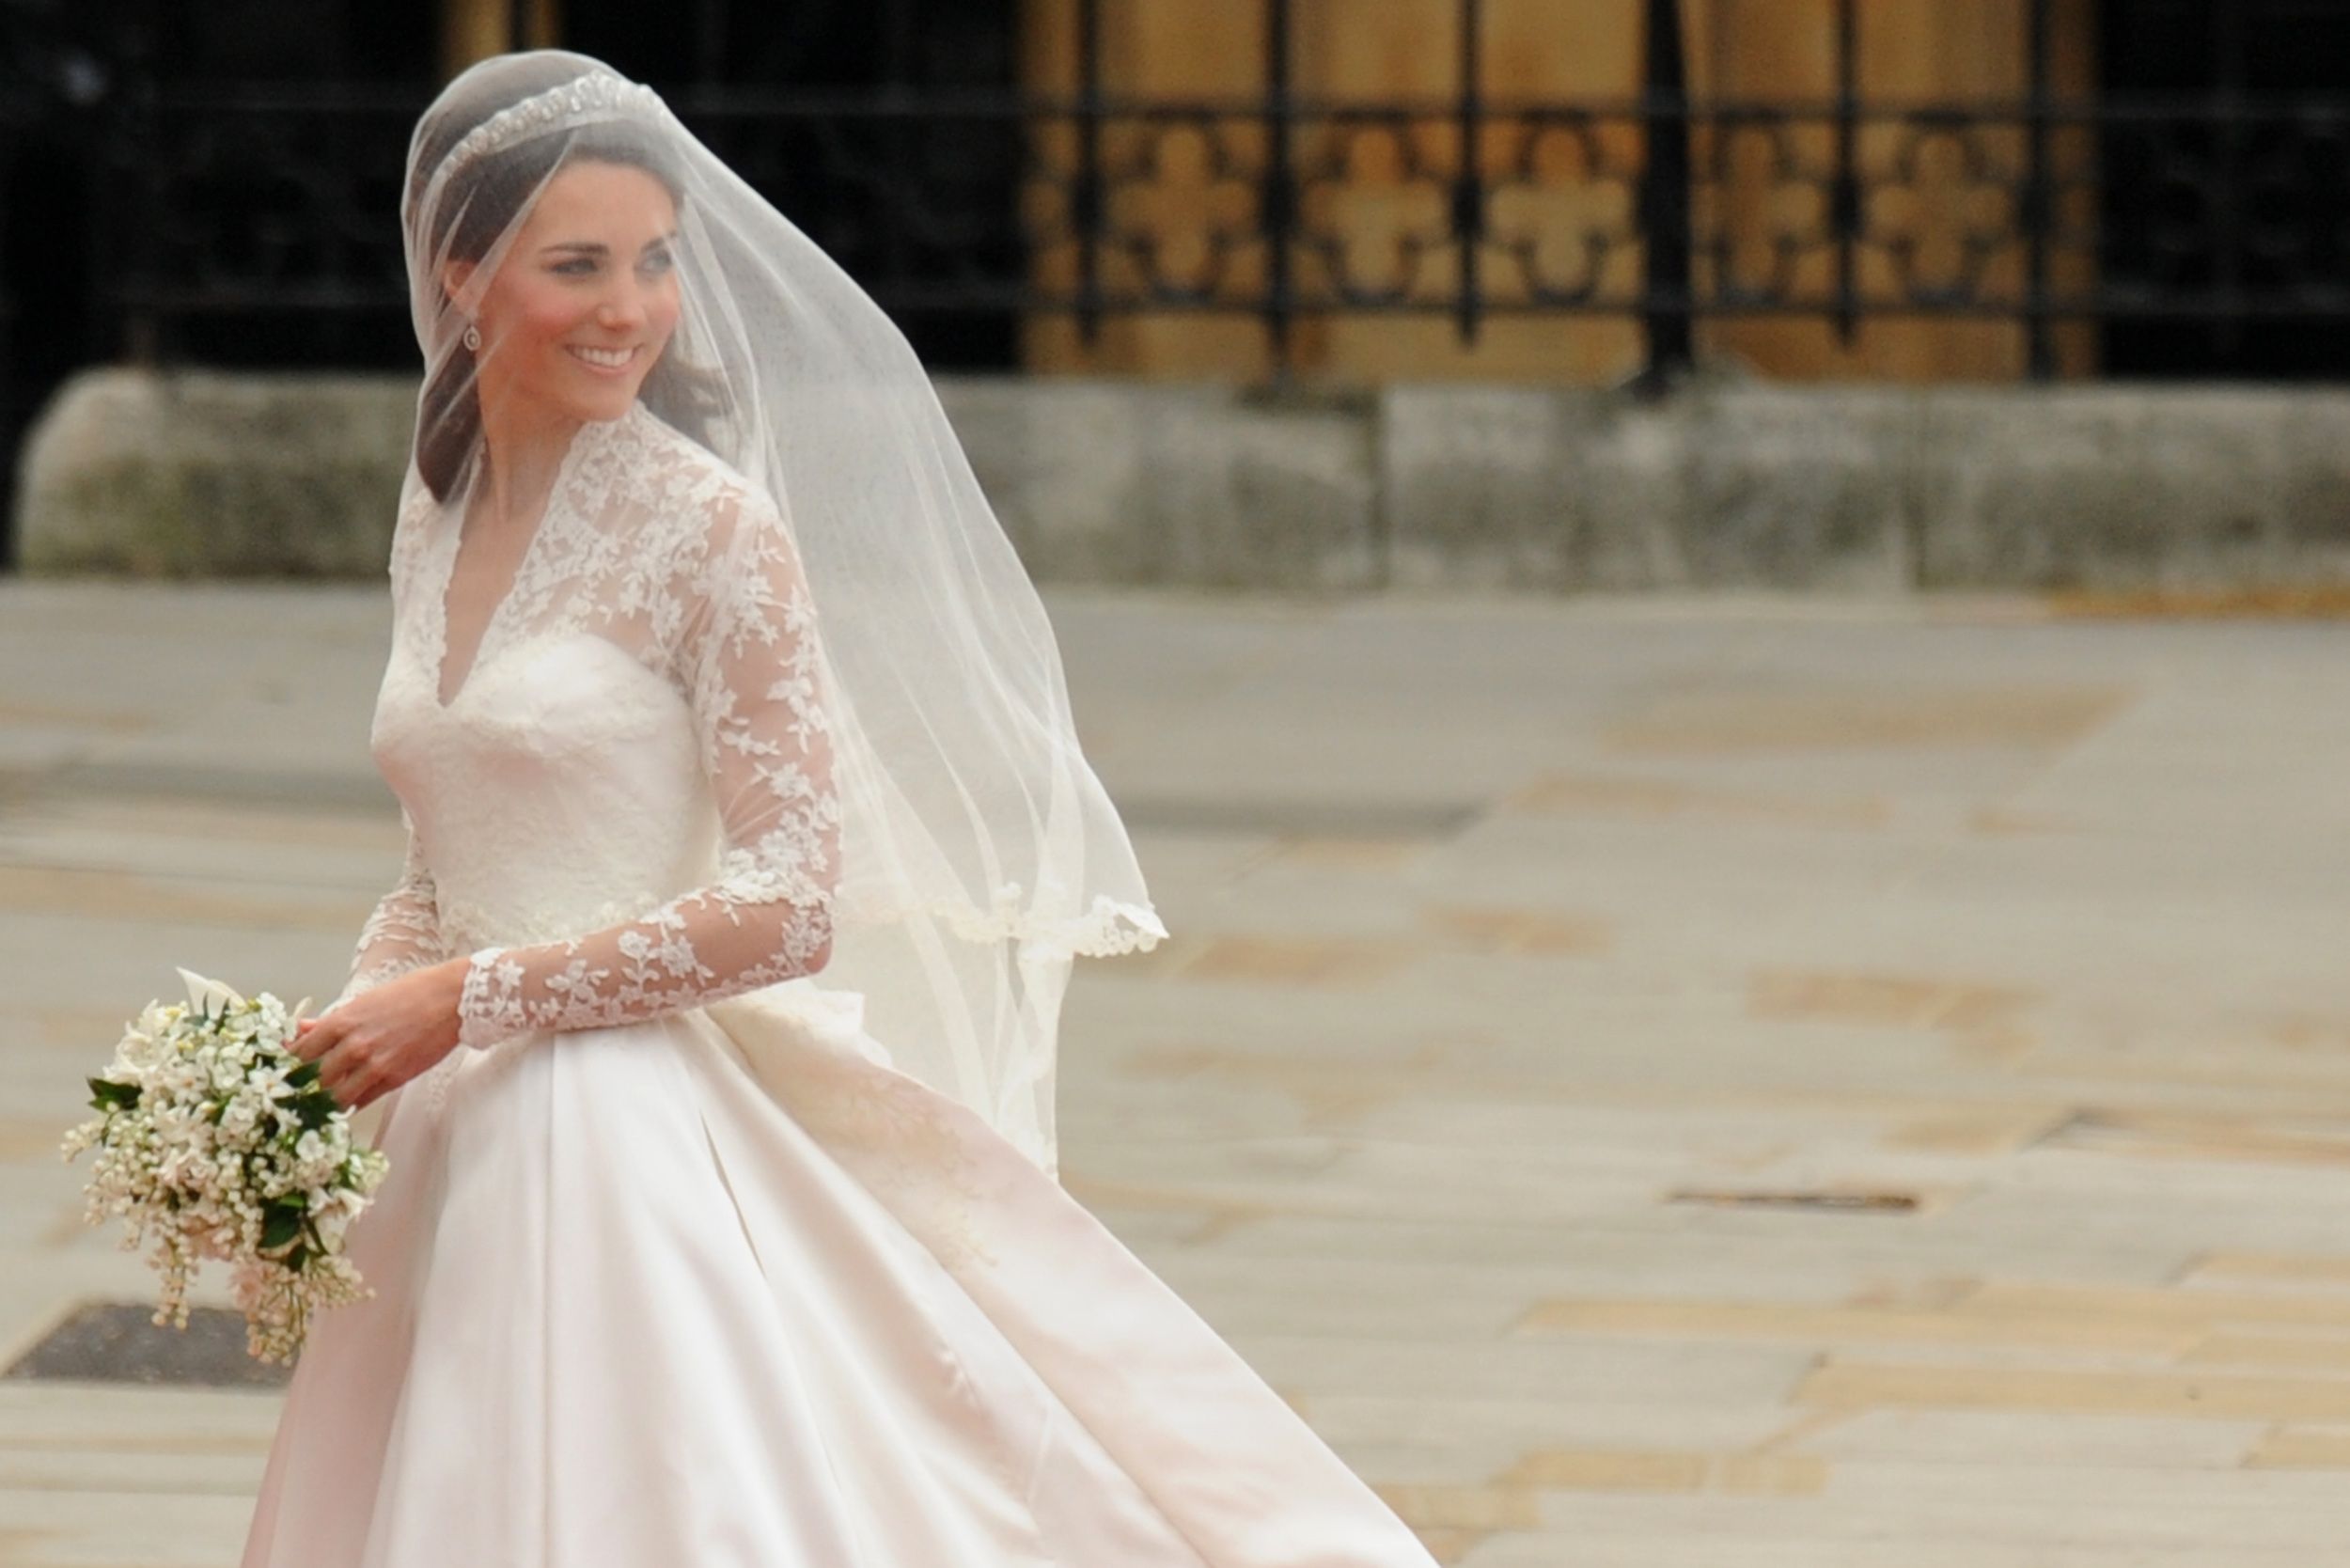 High Quality Custom Made Lace Bishop Sleeve Wedding Dress With Ruffles And  Cathedral Train By Stunning Kate Middleton From Verycute, $48.46 |  DHgate.Com